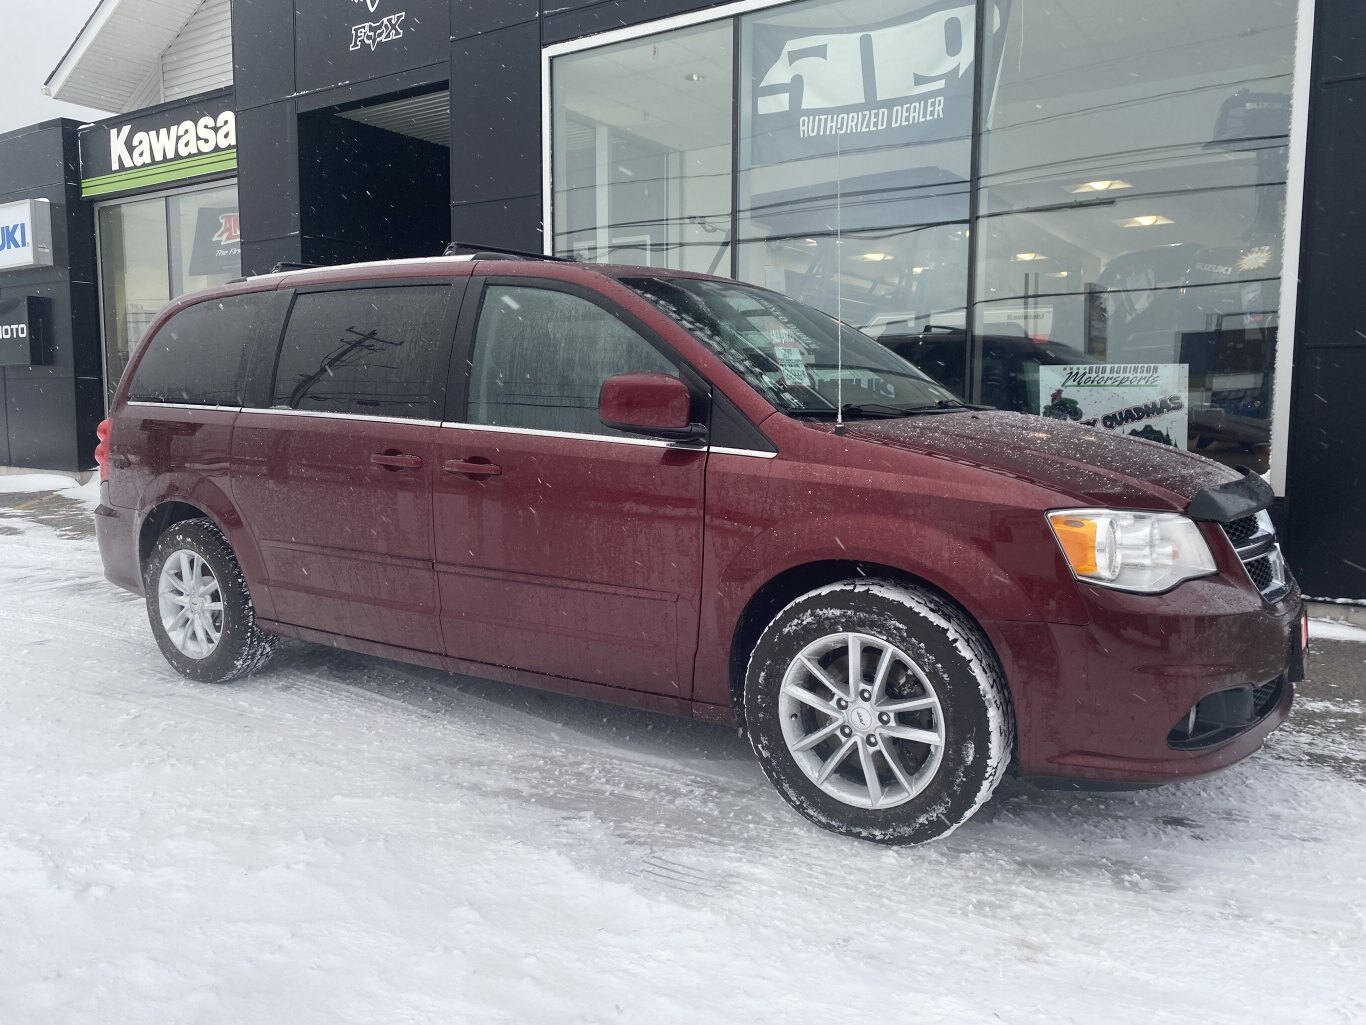 2017 DODGE GRAND CARAVAN SXT FRONT WHEEL DRIVE W/LEATHER SEATS, REMOTE START, STOW & GO, REAR VIEW CAMERA AND DVD PLAYER!